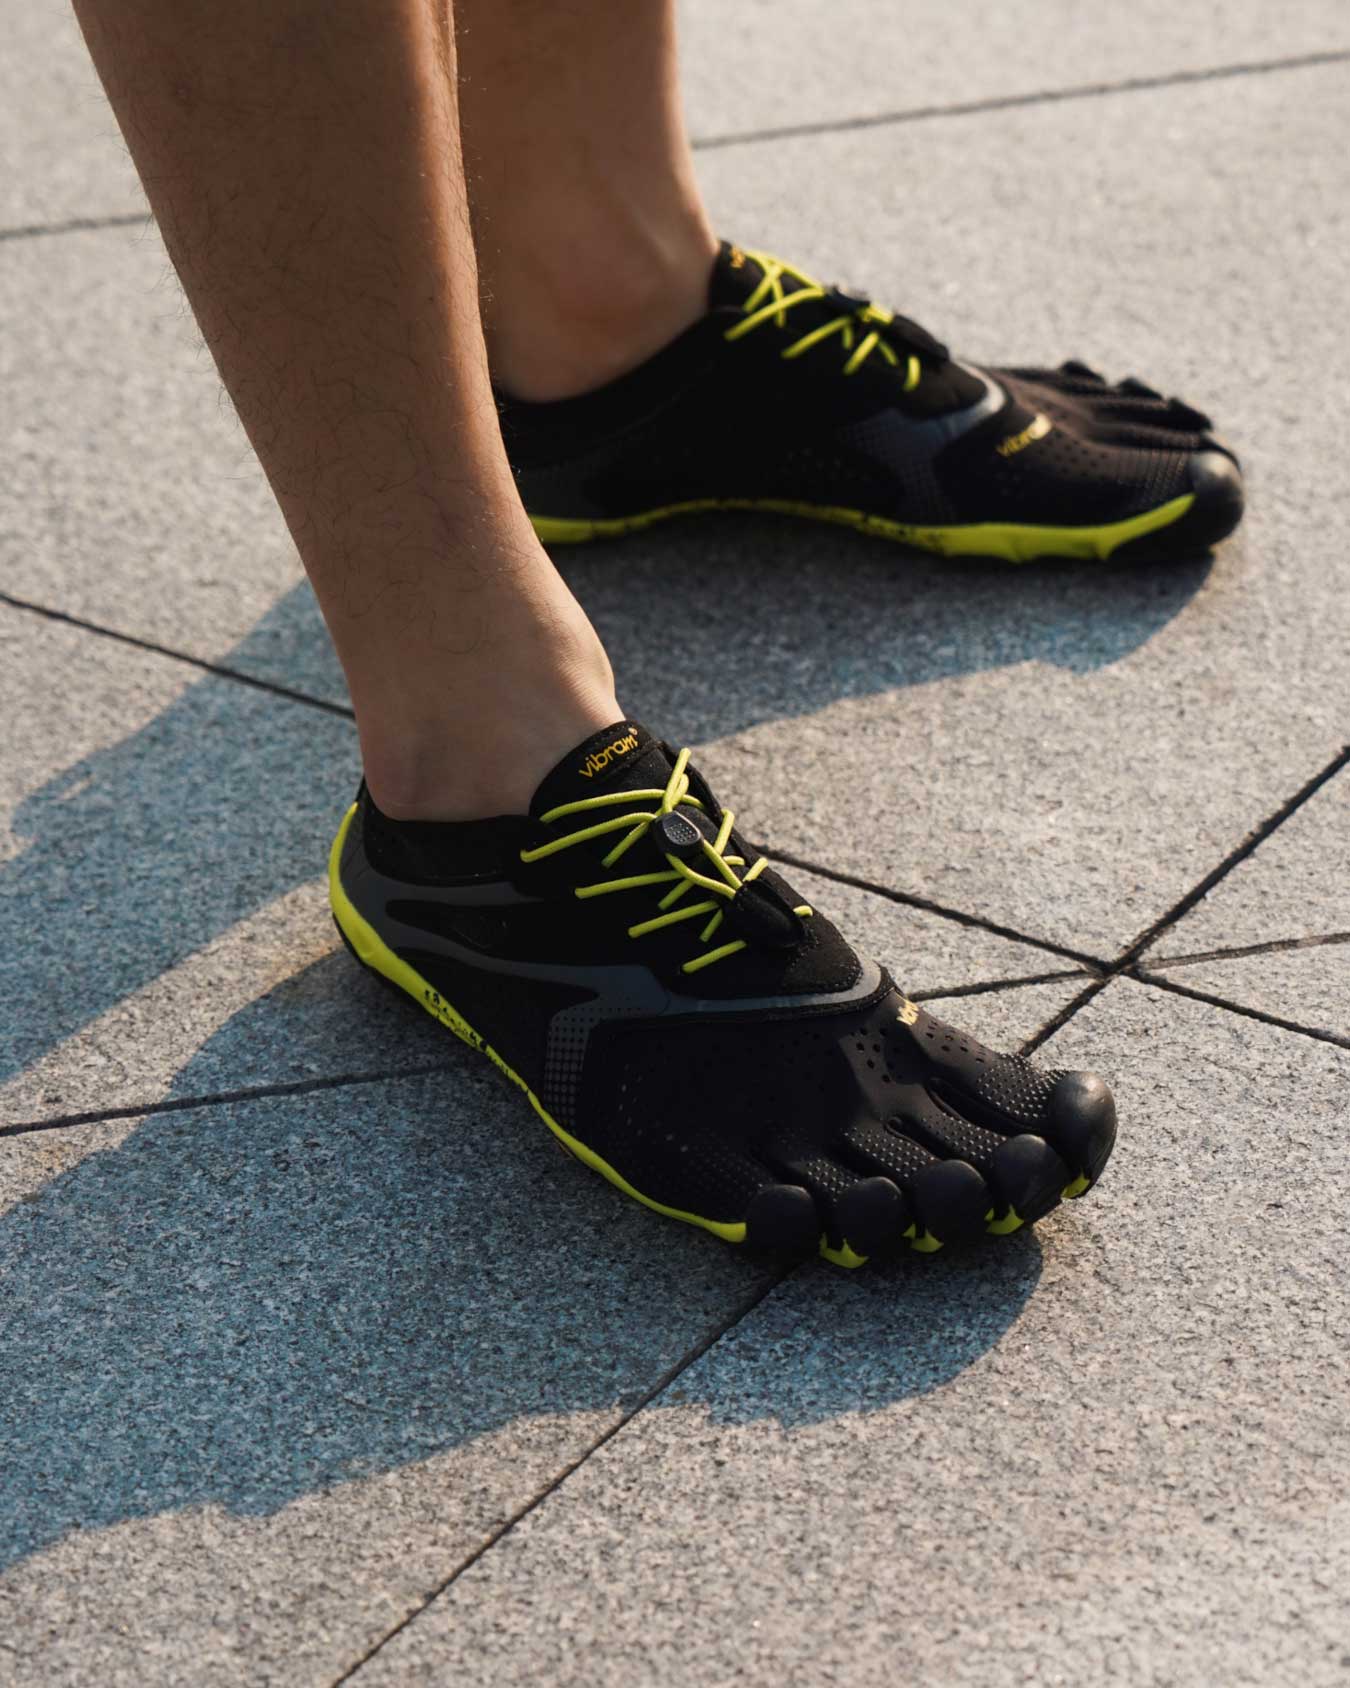 Individuals with webbed toes often think Vibram Five Fingers are